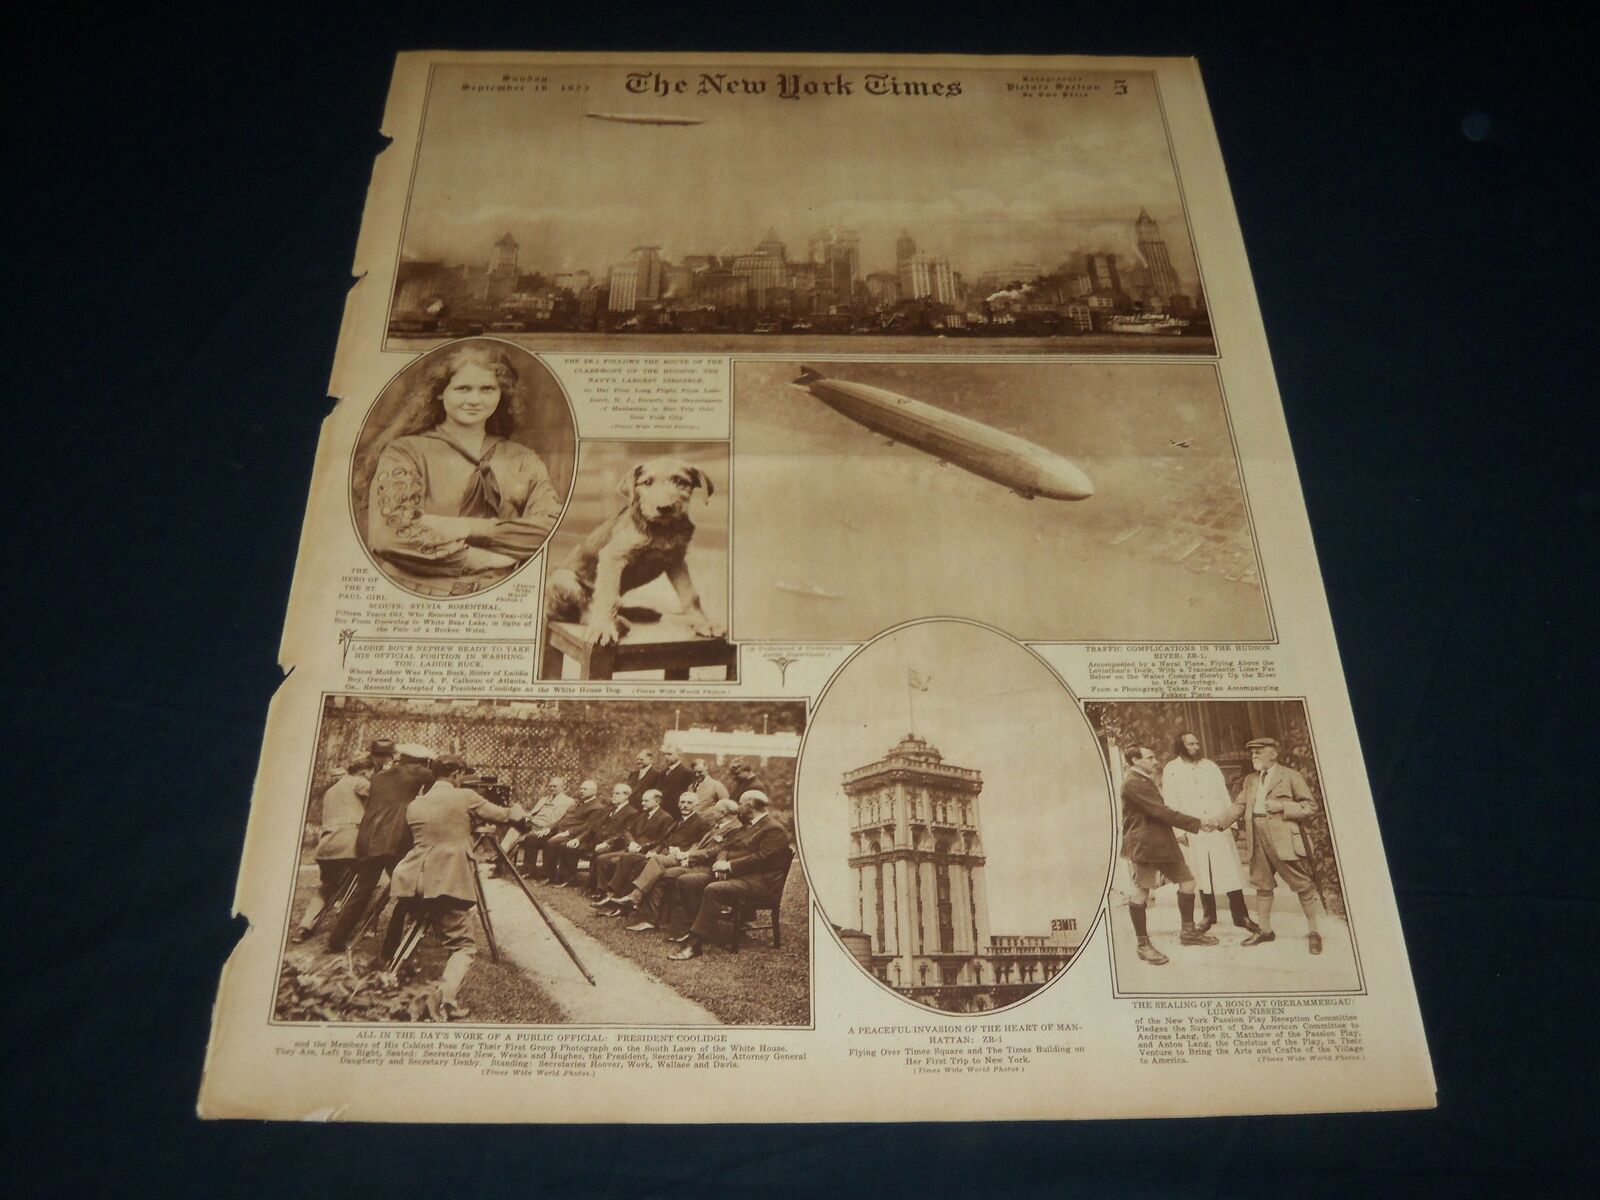 1923 SEPTEMBER 16 NEW YORK TIMES PICTURE SECTION NO. 5 & 6 - GANDHI - NT 8899